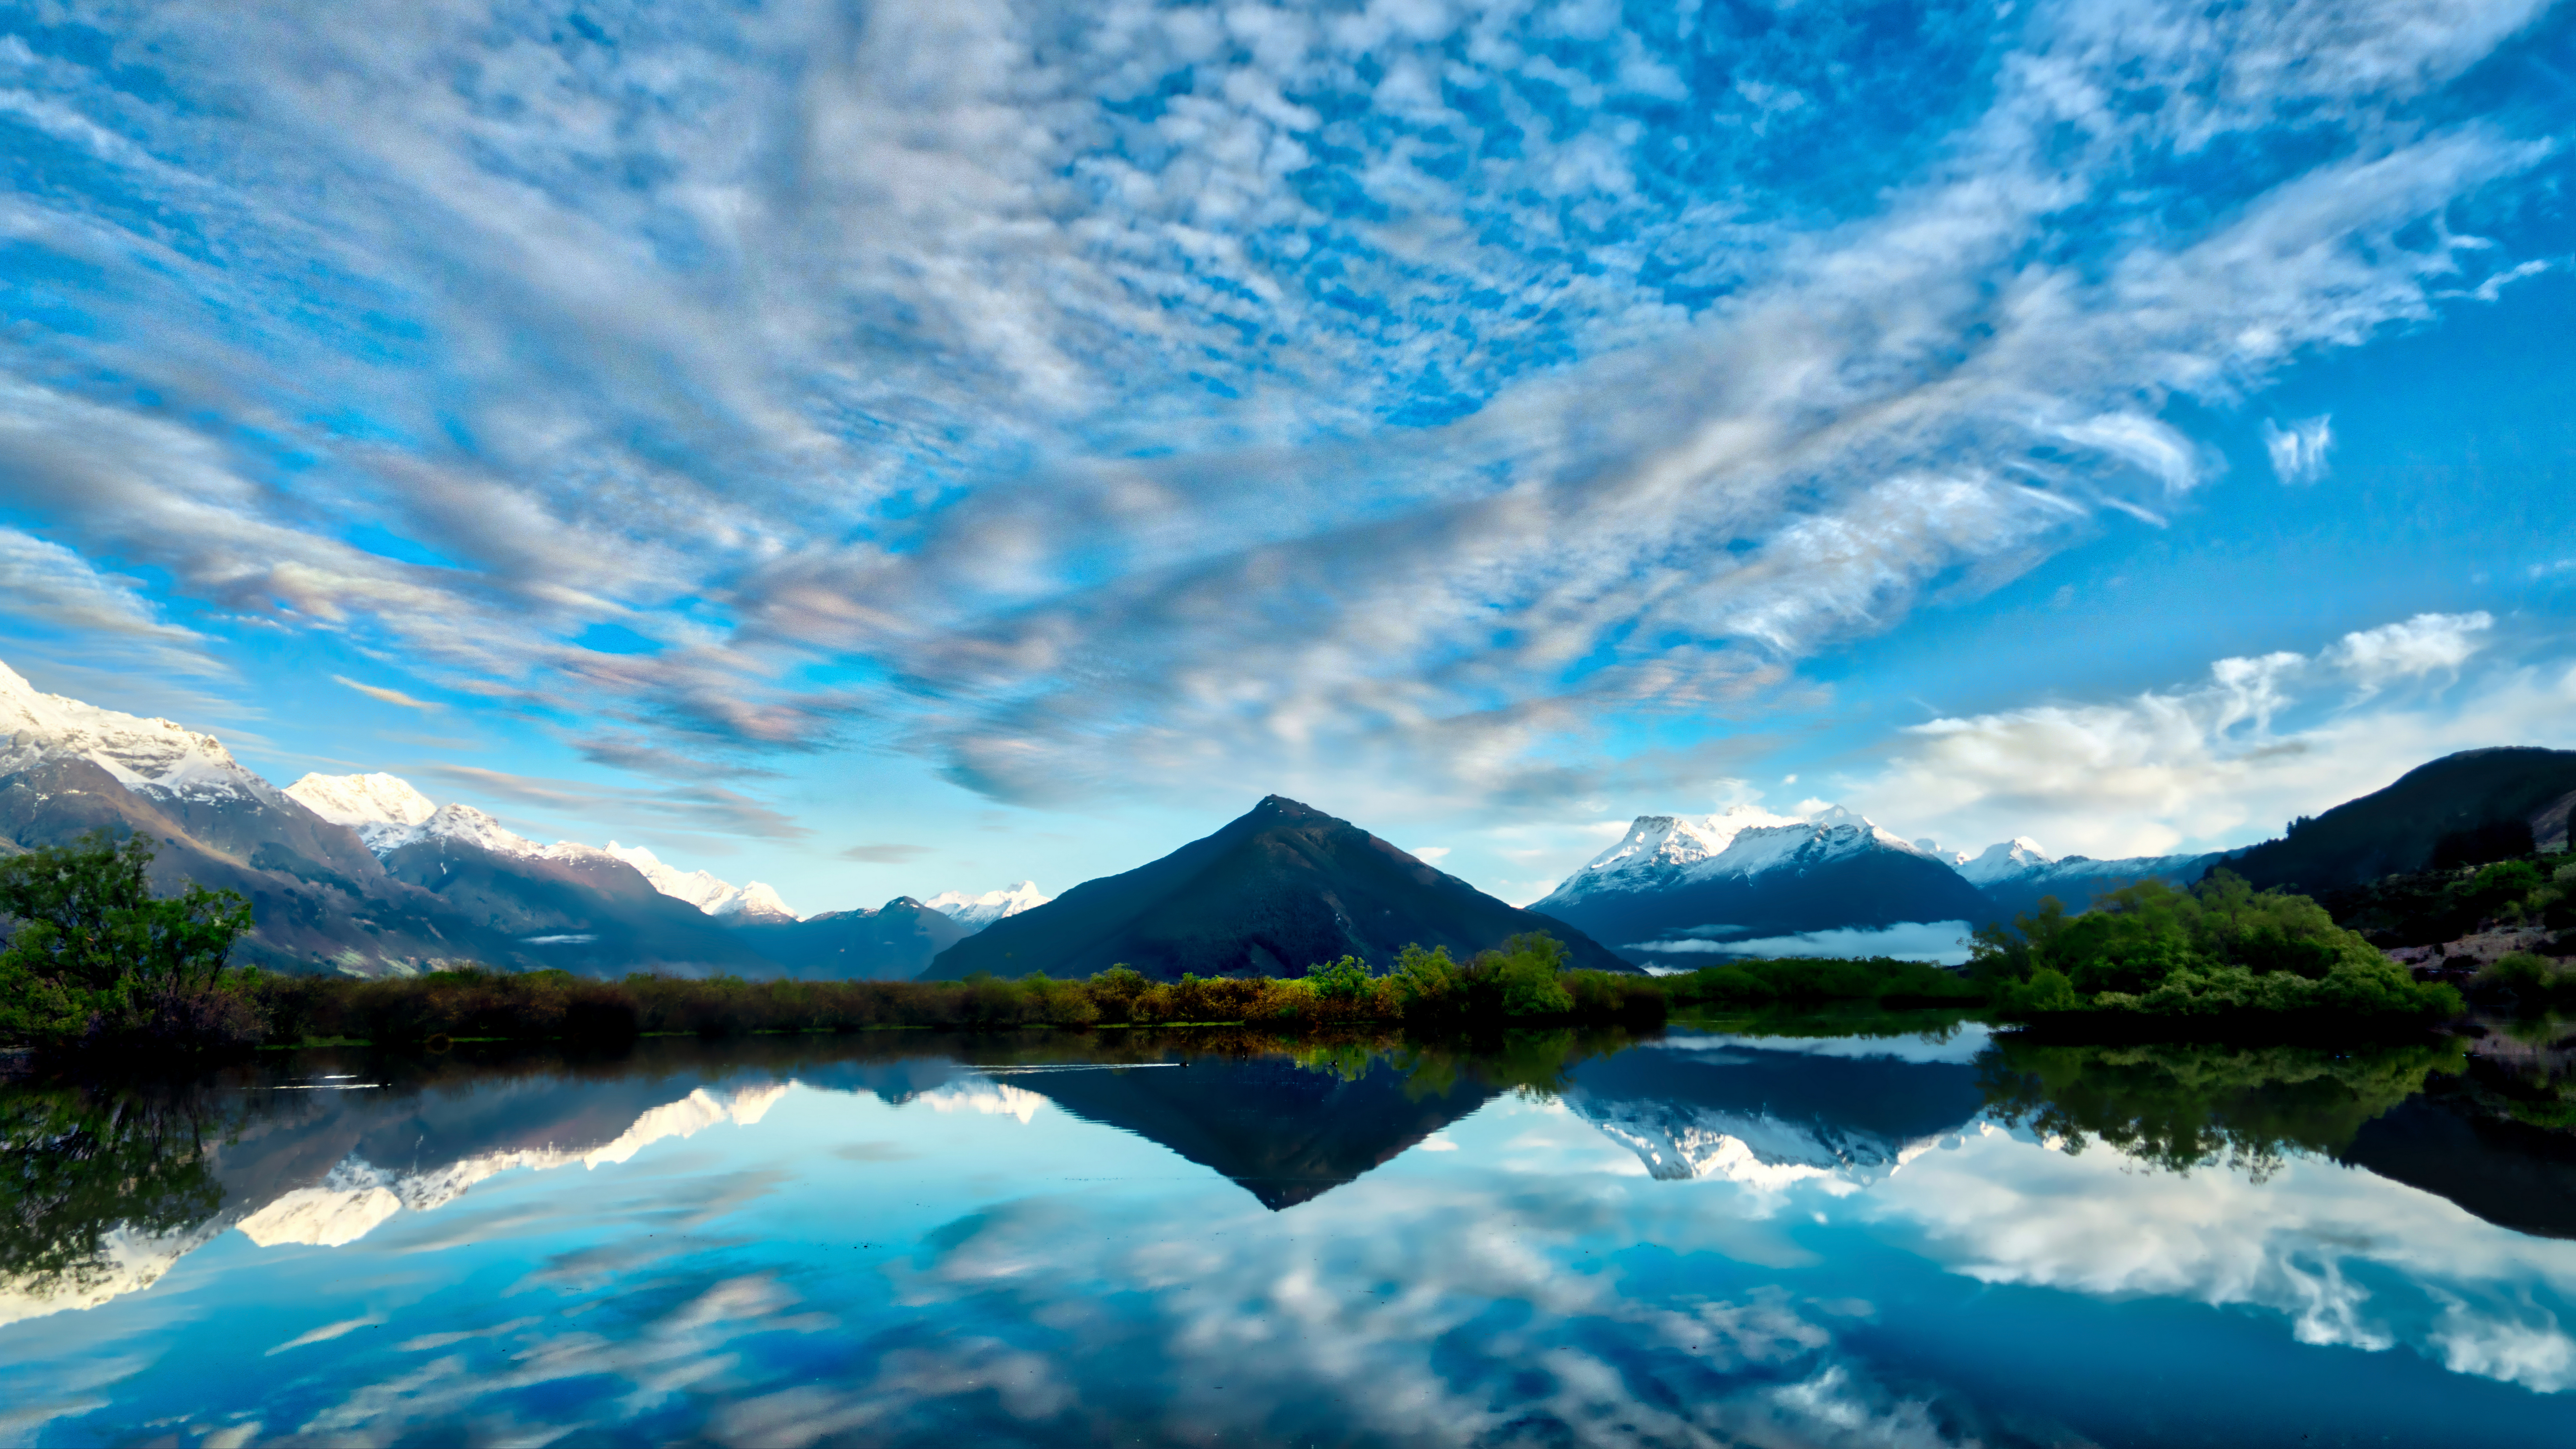 General 7680x4320 Trey Ratcliff photography water reflection clouds sky mountains New Zealand Glenorchy nature